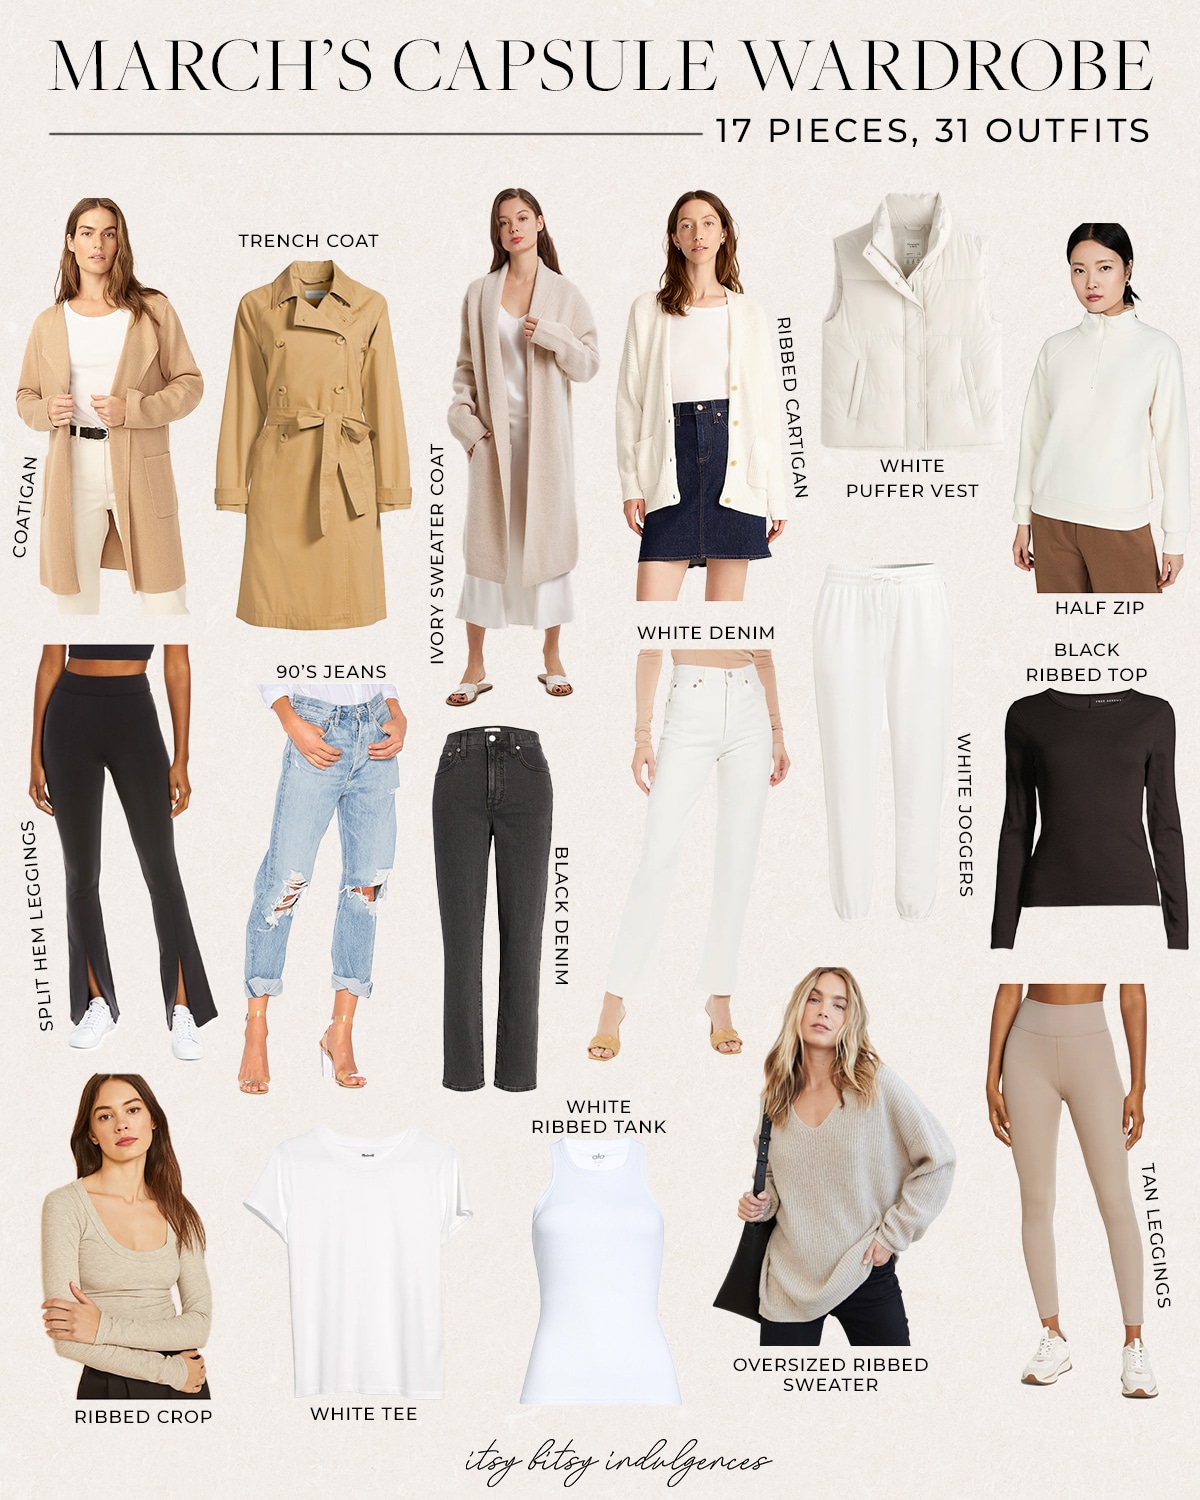 Itsy Bitsy IndulgencesMarch’s Capsule Wardrobe || 17 Pieces, 31 Outfits